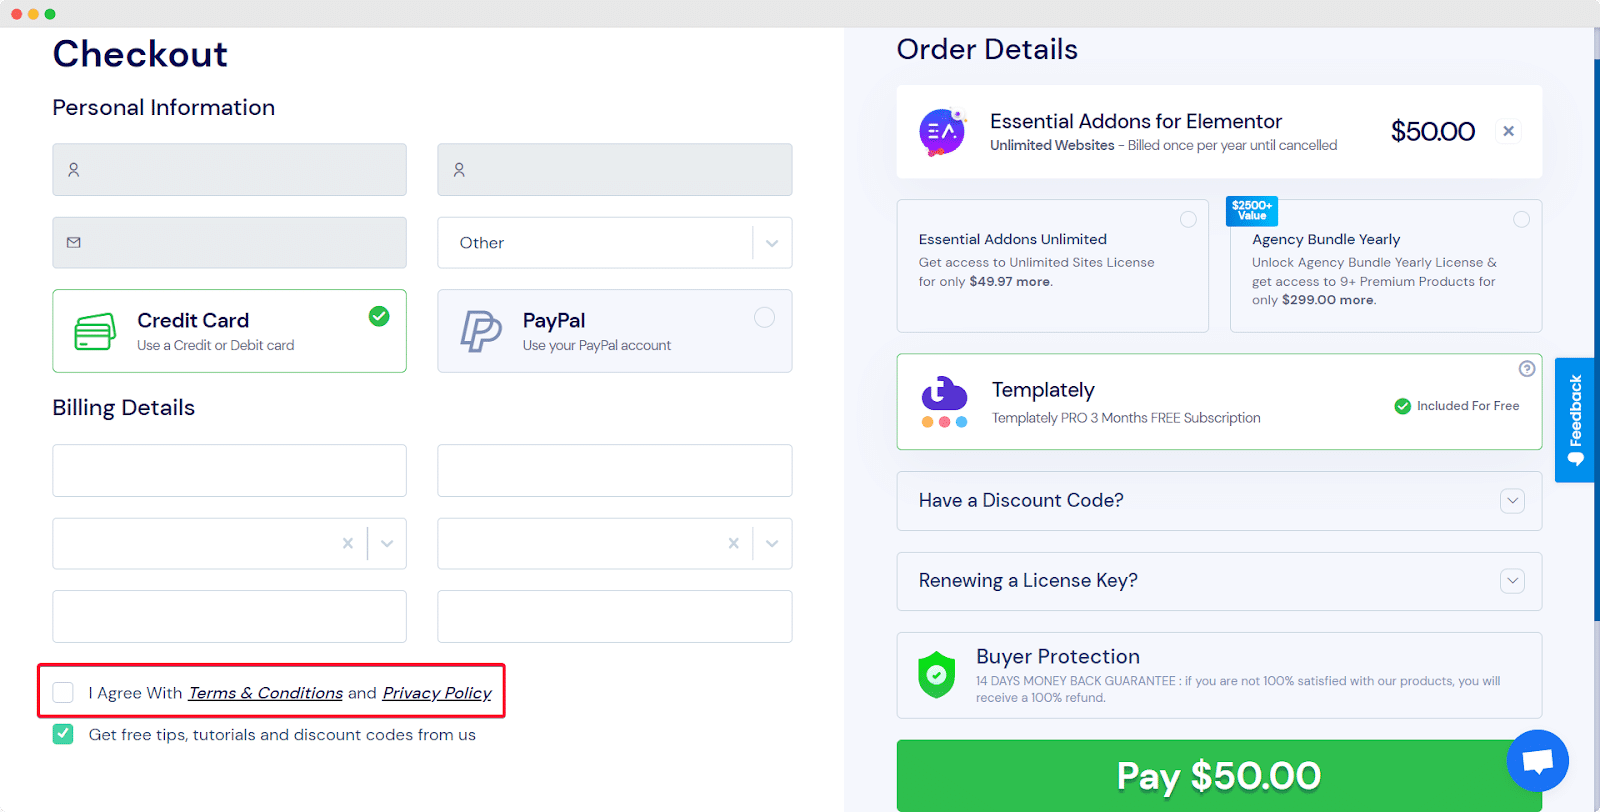 Using a Payment Method